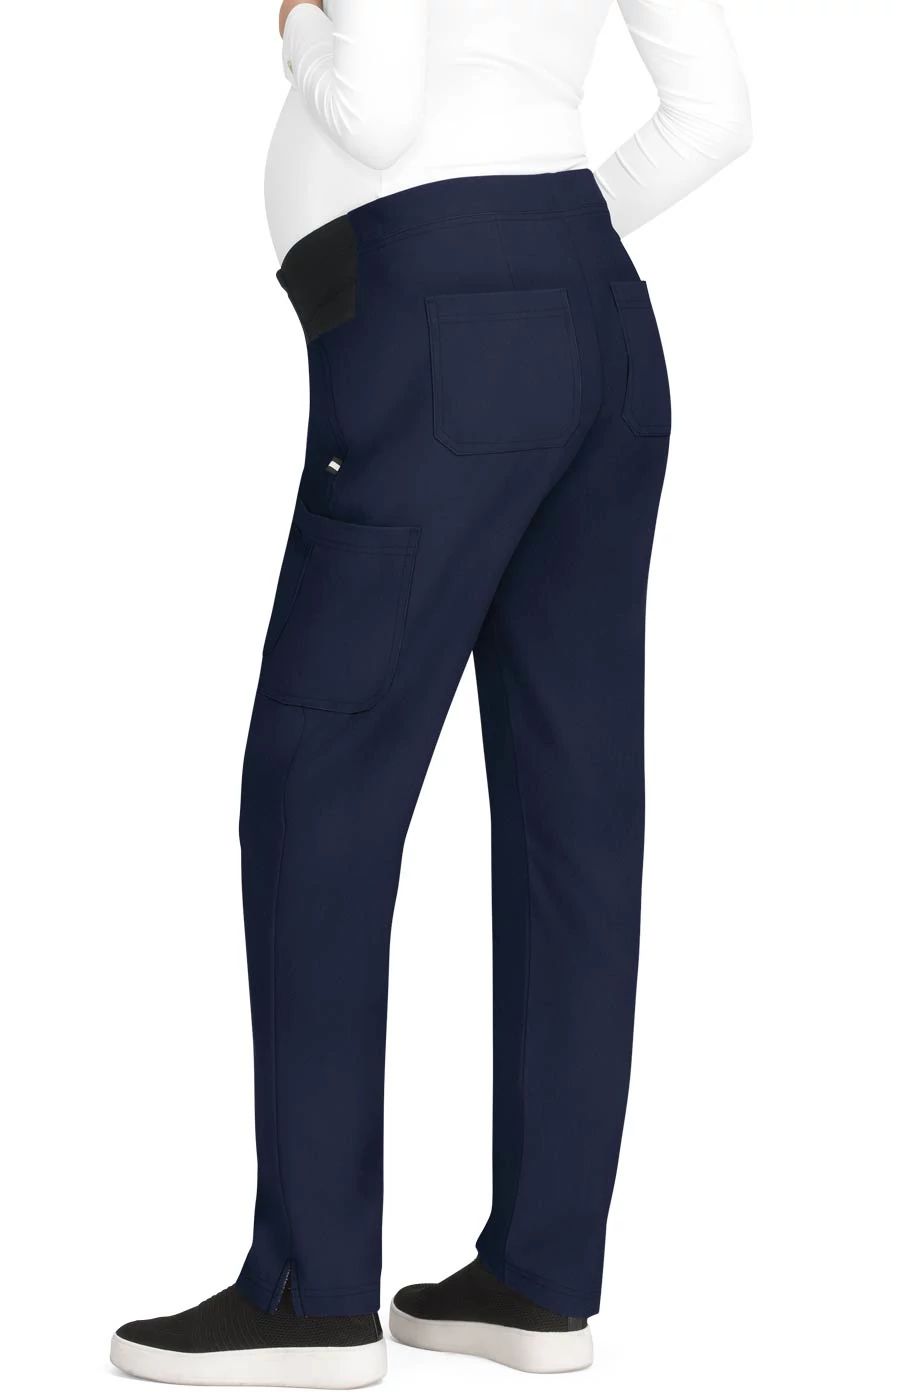 on-the-move-maternity-pant-navy